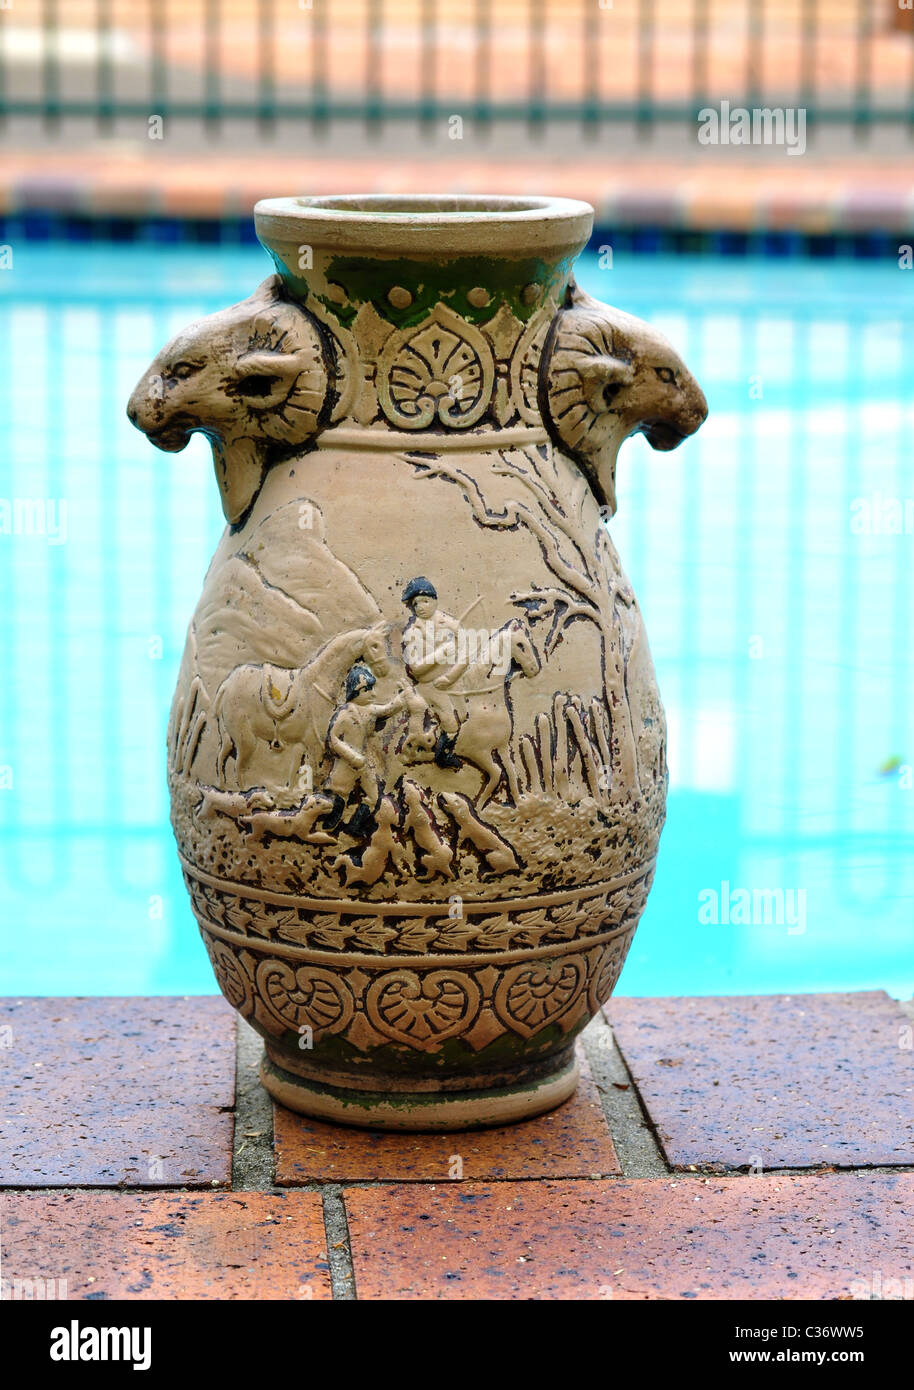 Antic vase is standing on the side of the pool. Stock Photo